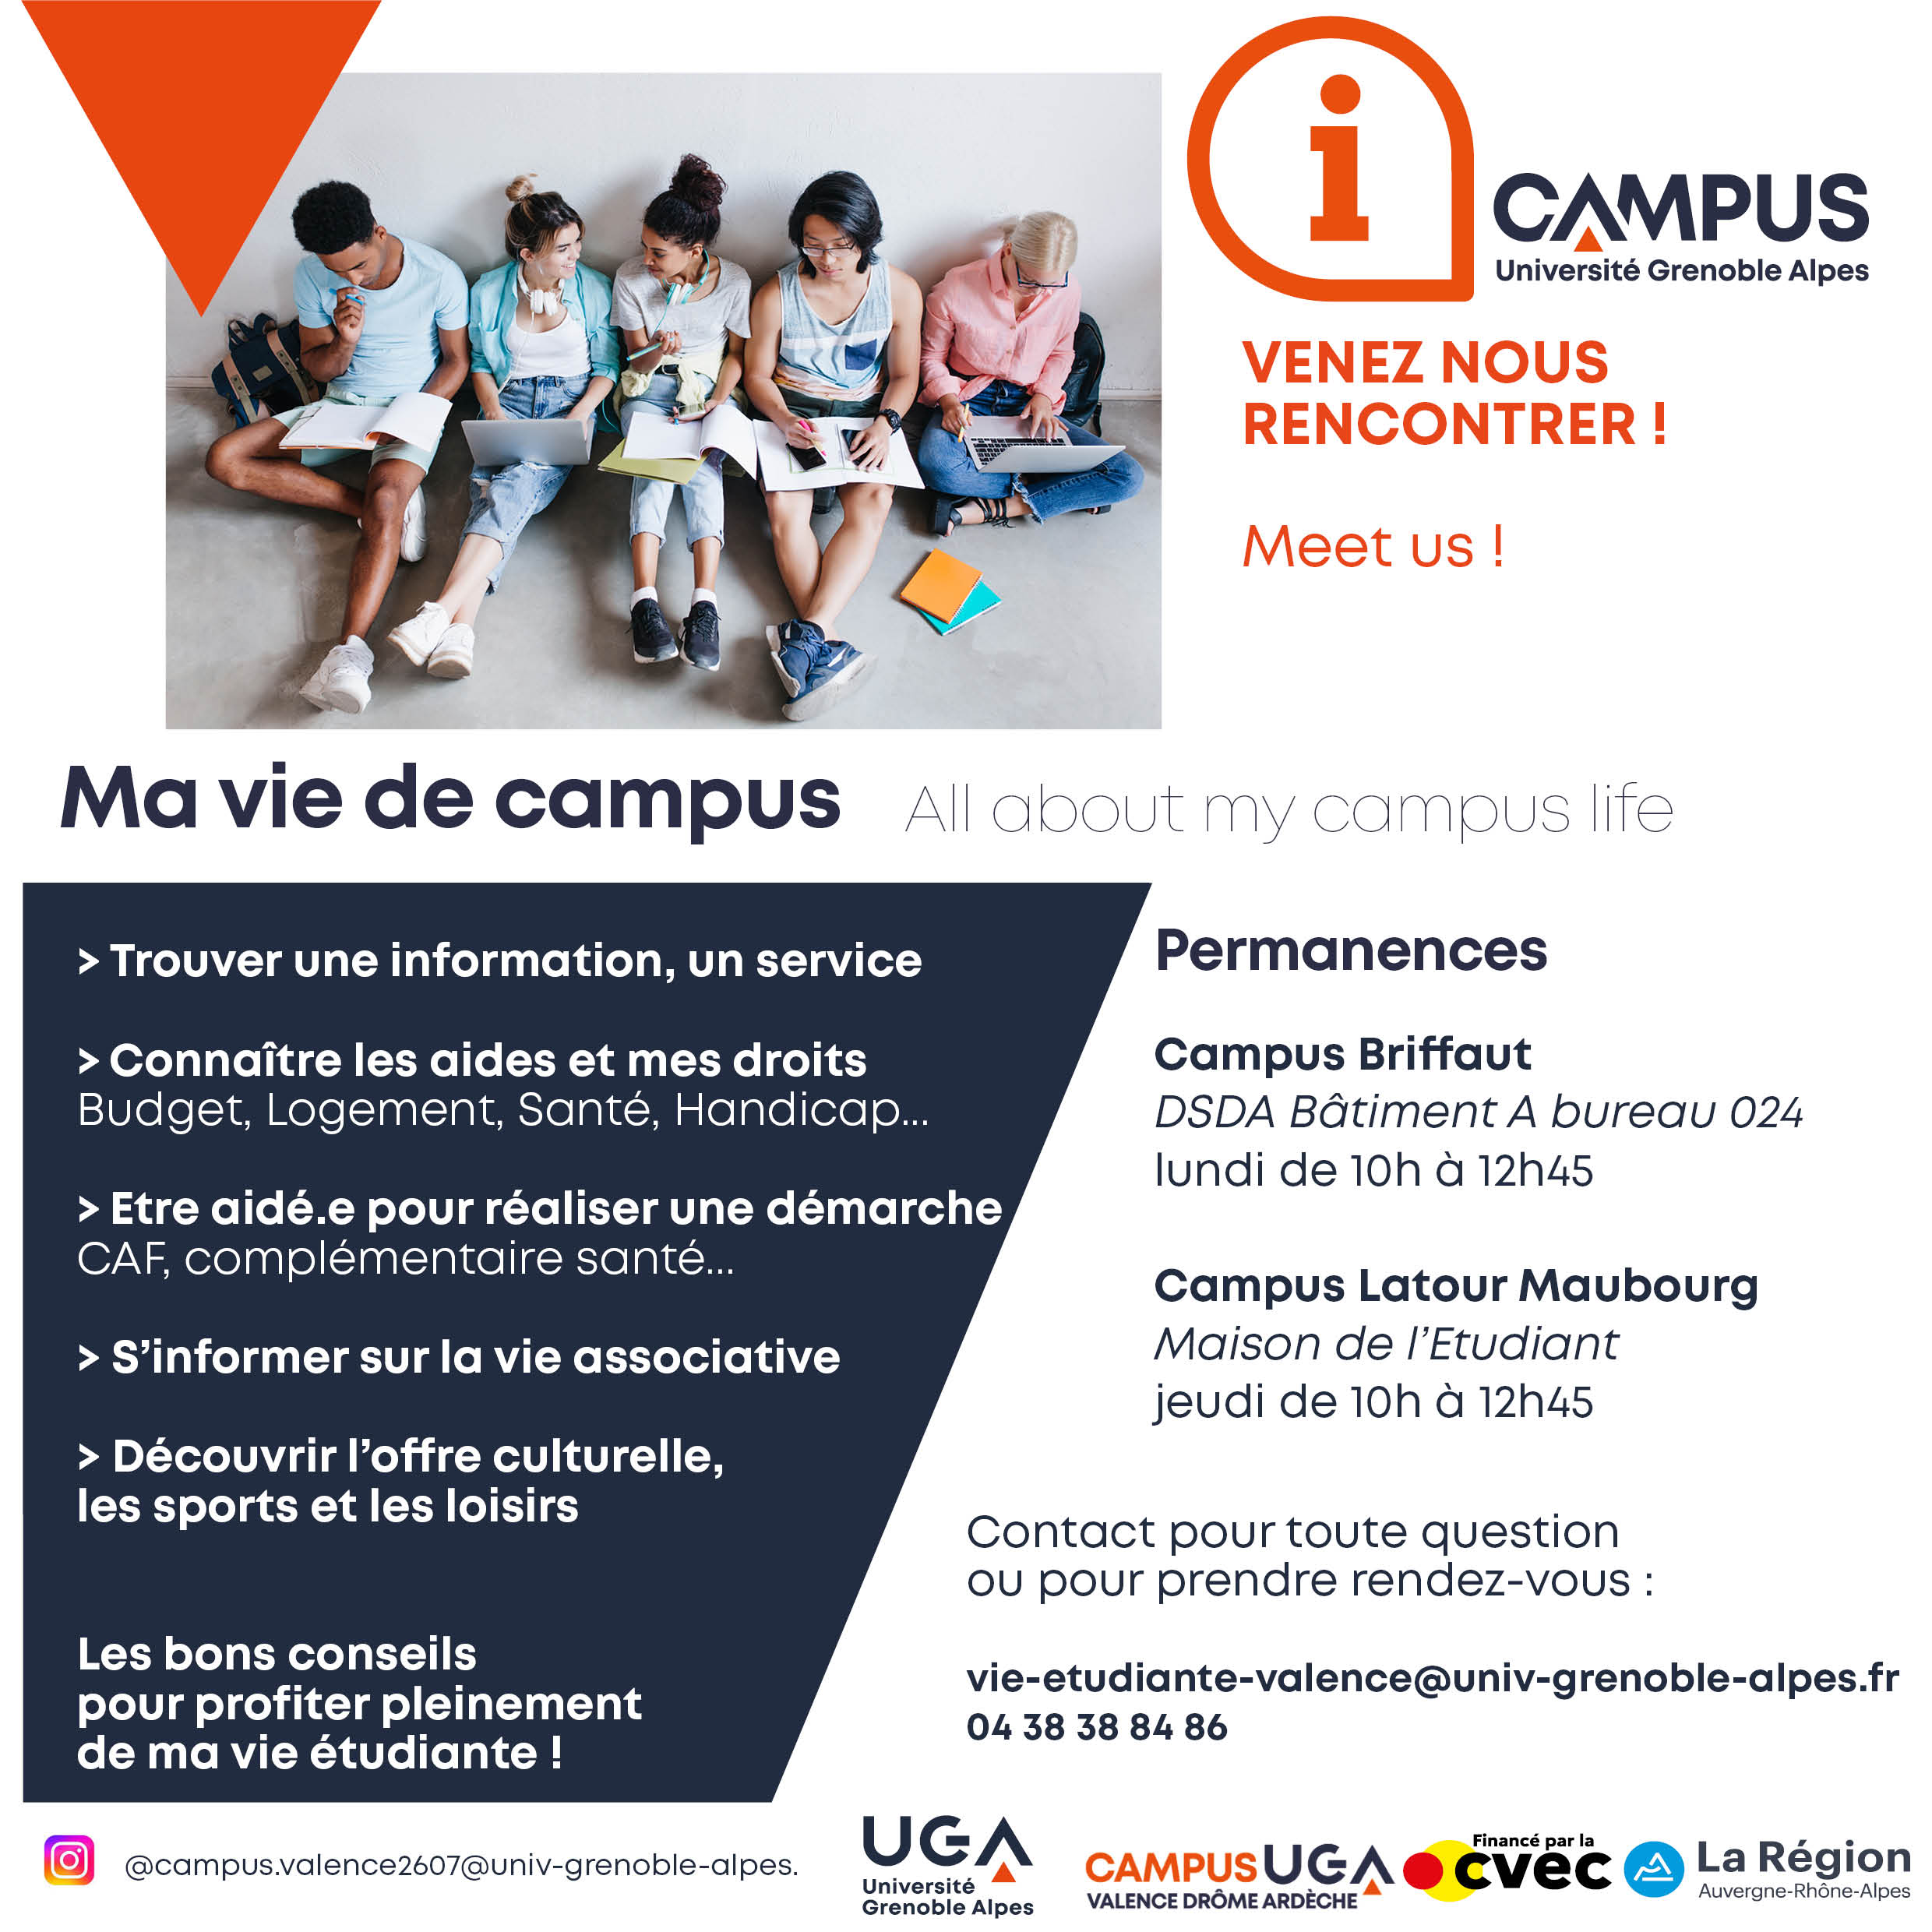 Icampus Valence